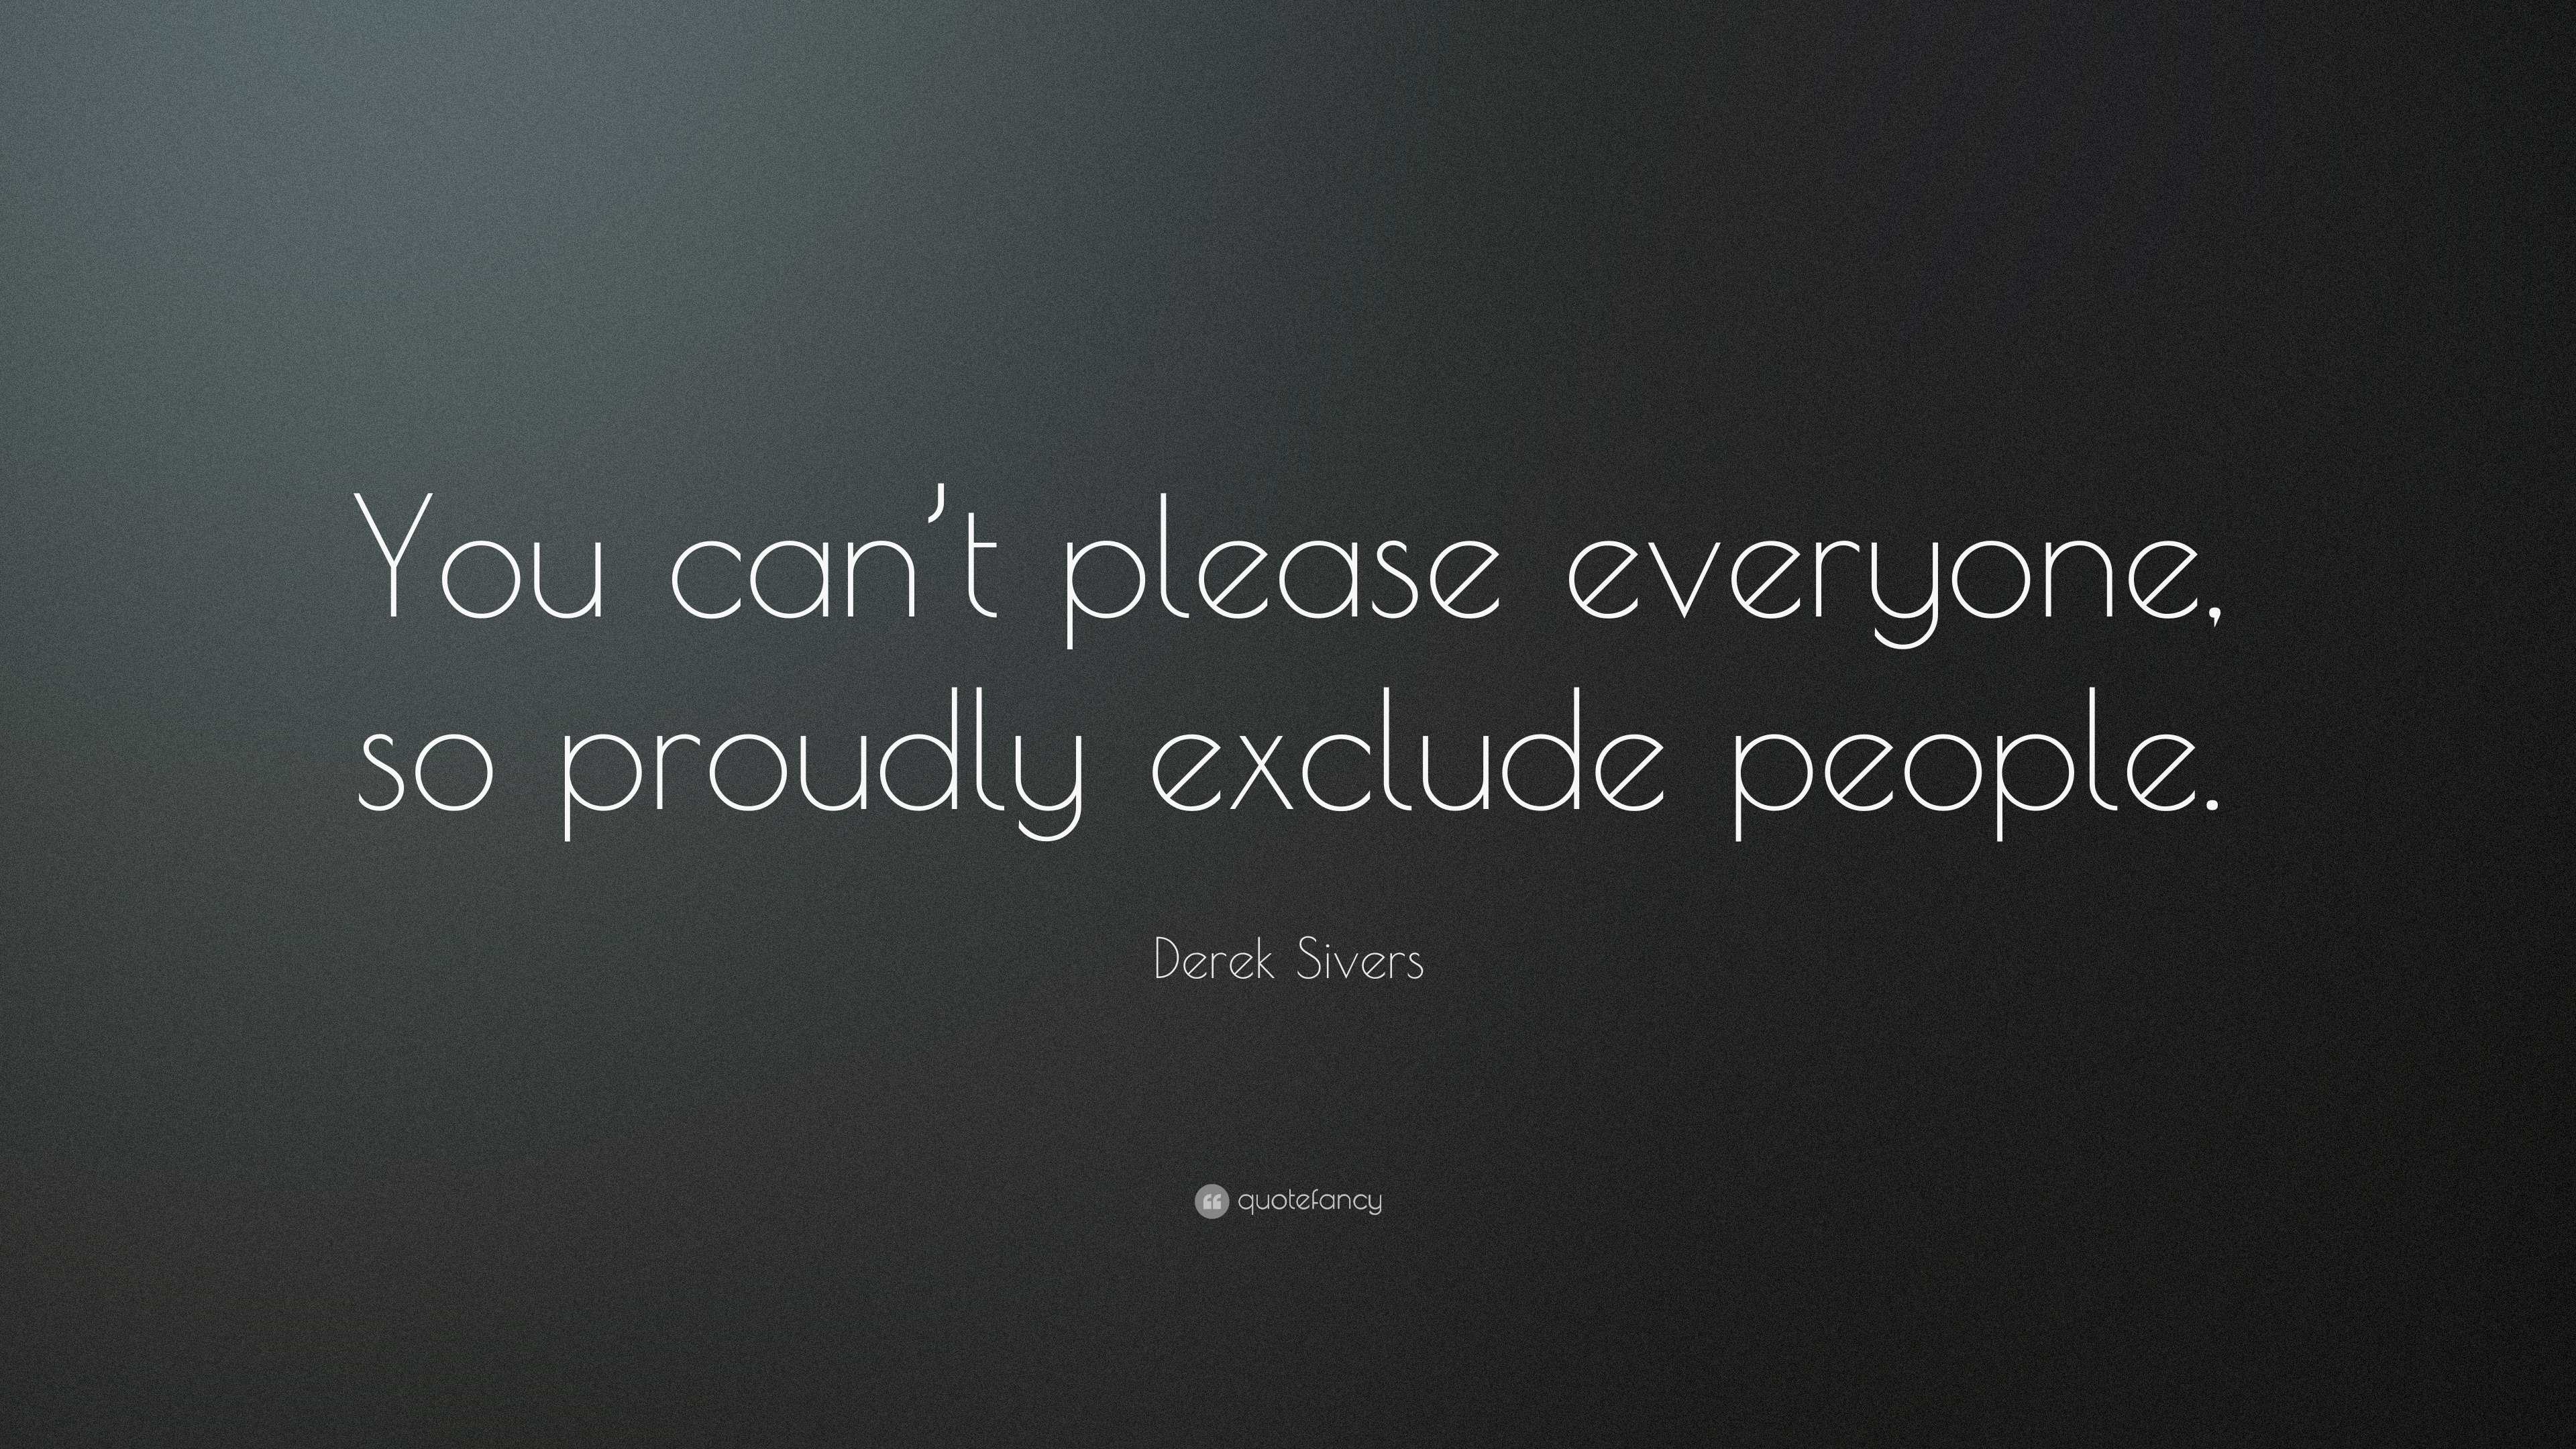 https://quotefancy.com/media/wallpaper/3840x2160/7916565-Derek-Sivers-Quote-You-can-t-please-everyone-so-proudly-exclude.jpg